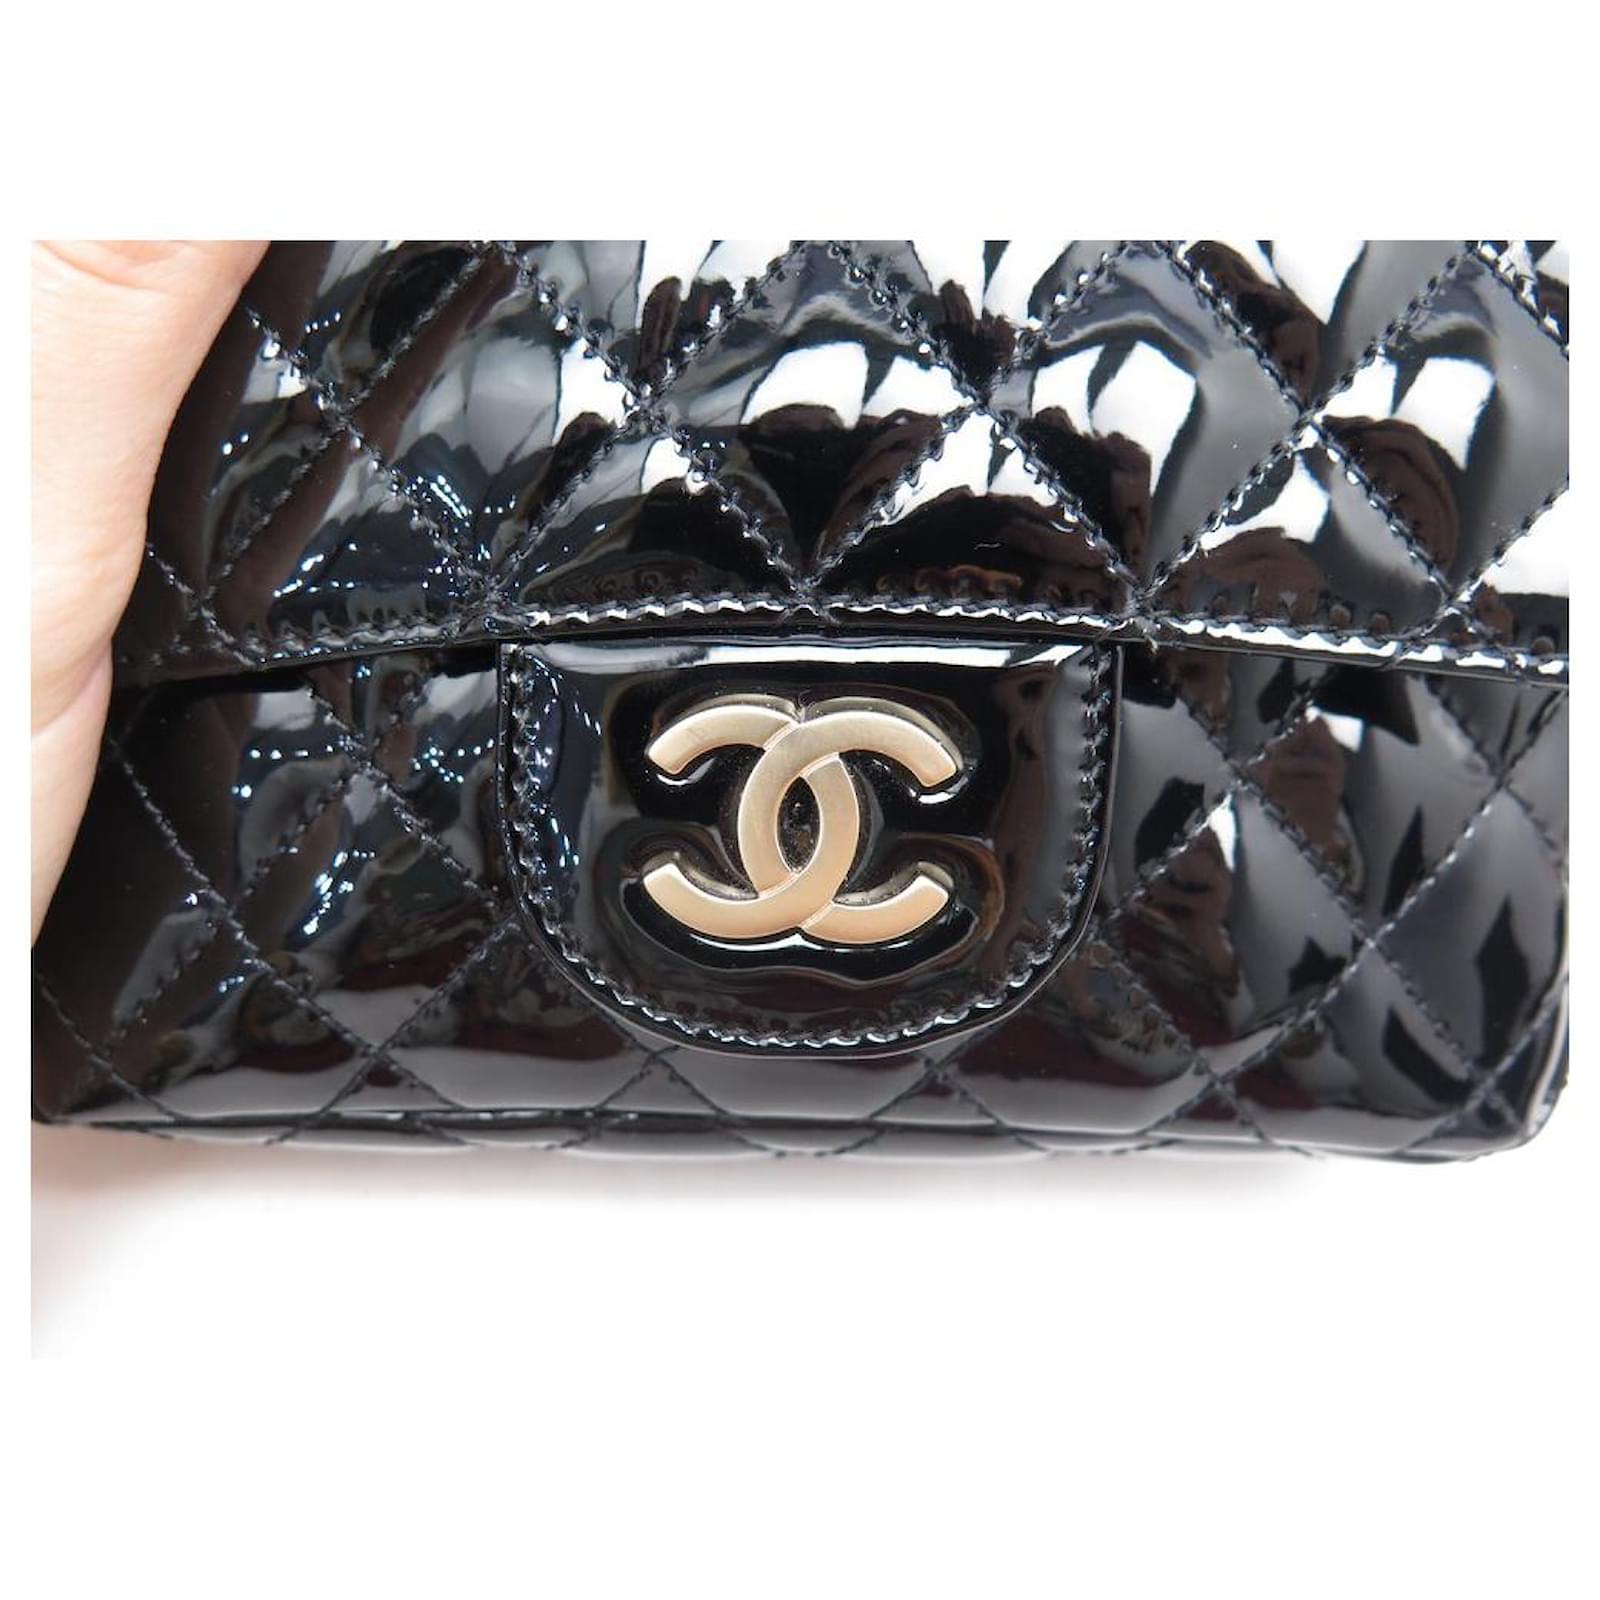 NEW CHANEL A HANDBAG48621 lined LIMITED EDITION FLAP & POUCH BAG